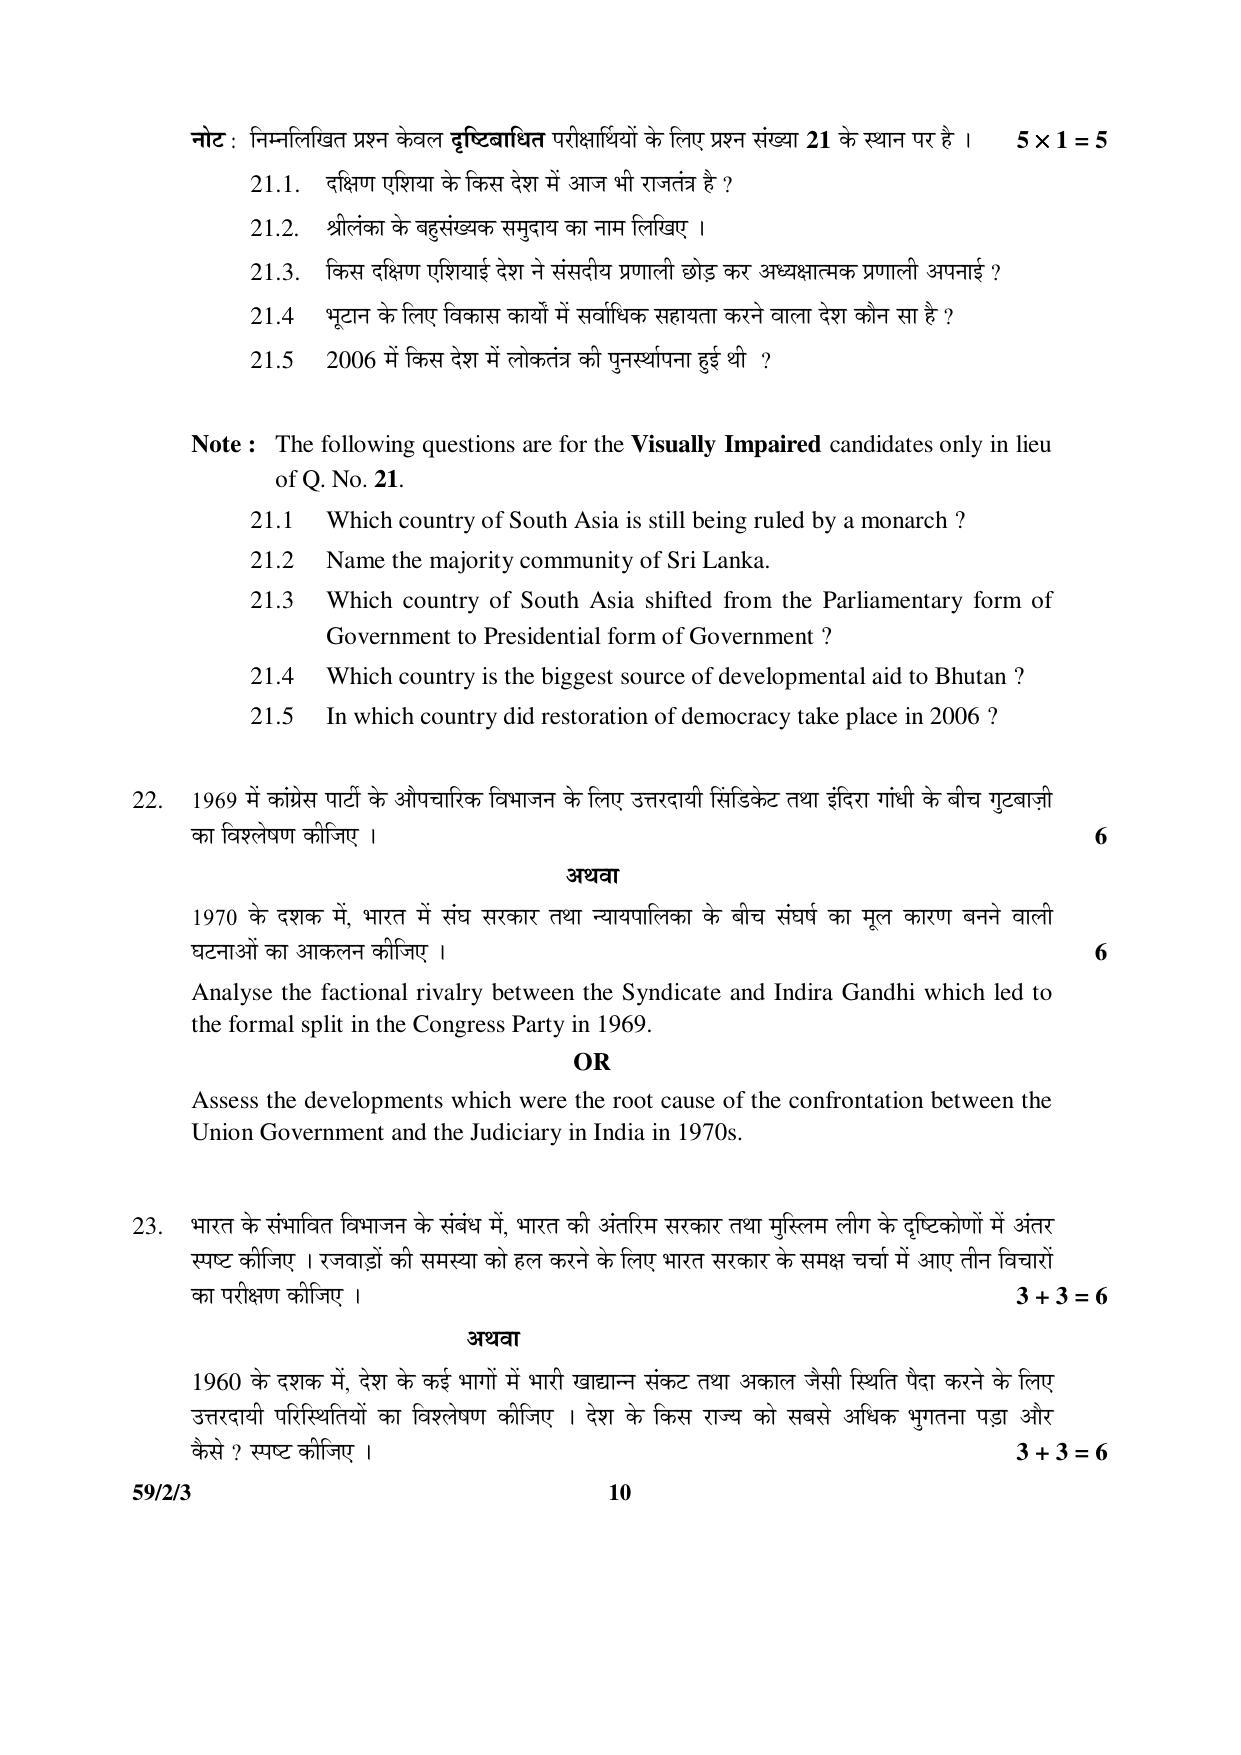 CBSE Class 12 59-2-3 _Political Science 2016 Question Paper - Page 10